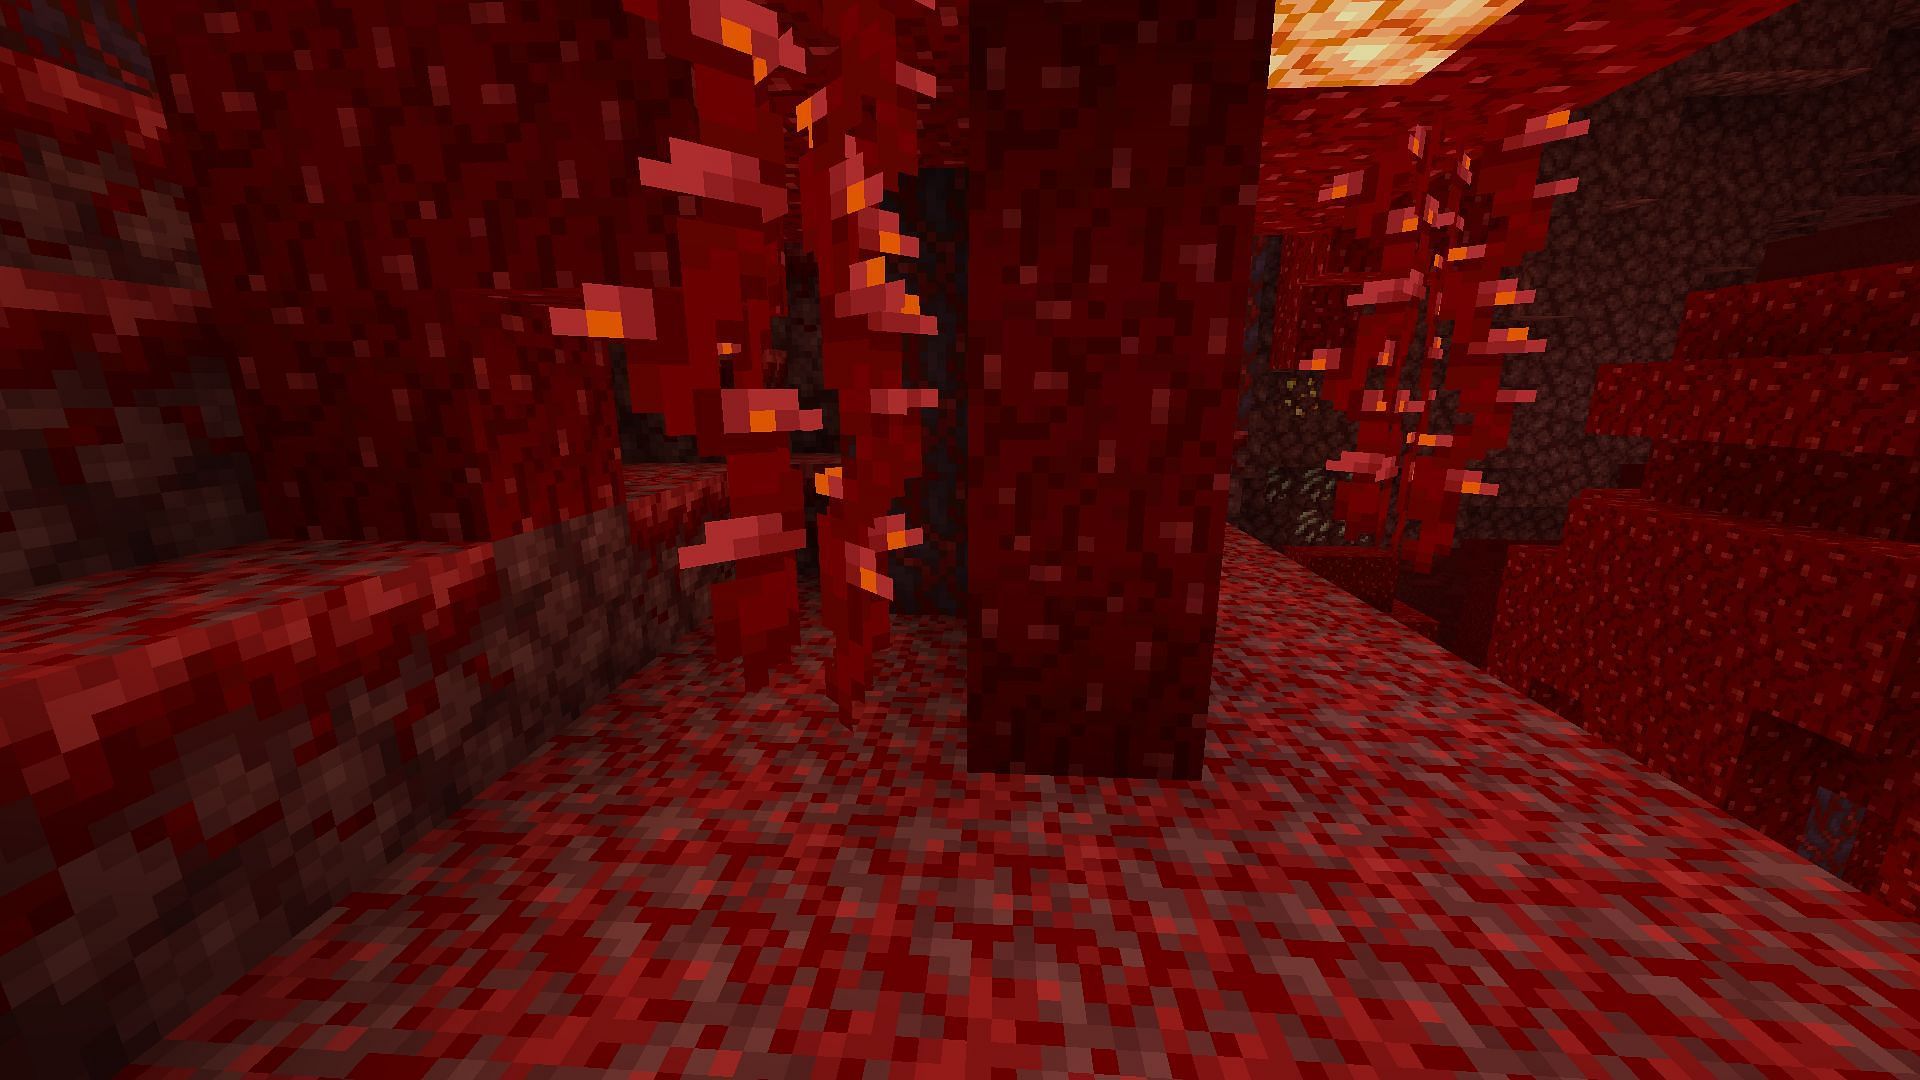 The entire Nether realm can be accessed to progress forward in Minecraft (Image via Mojang)